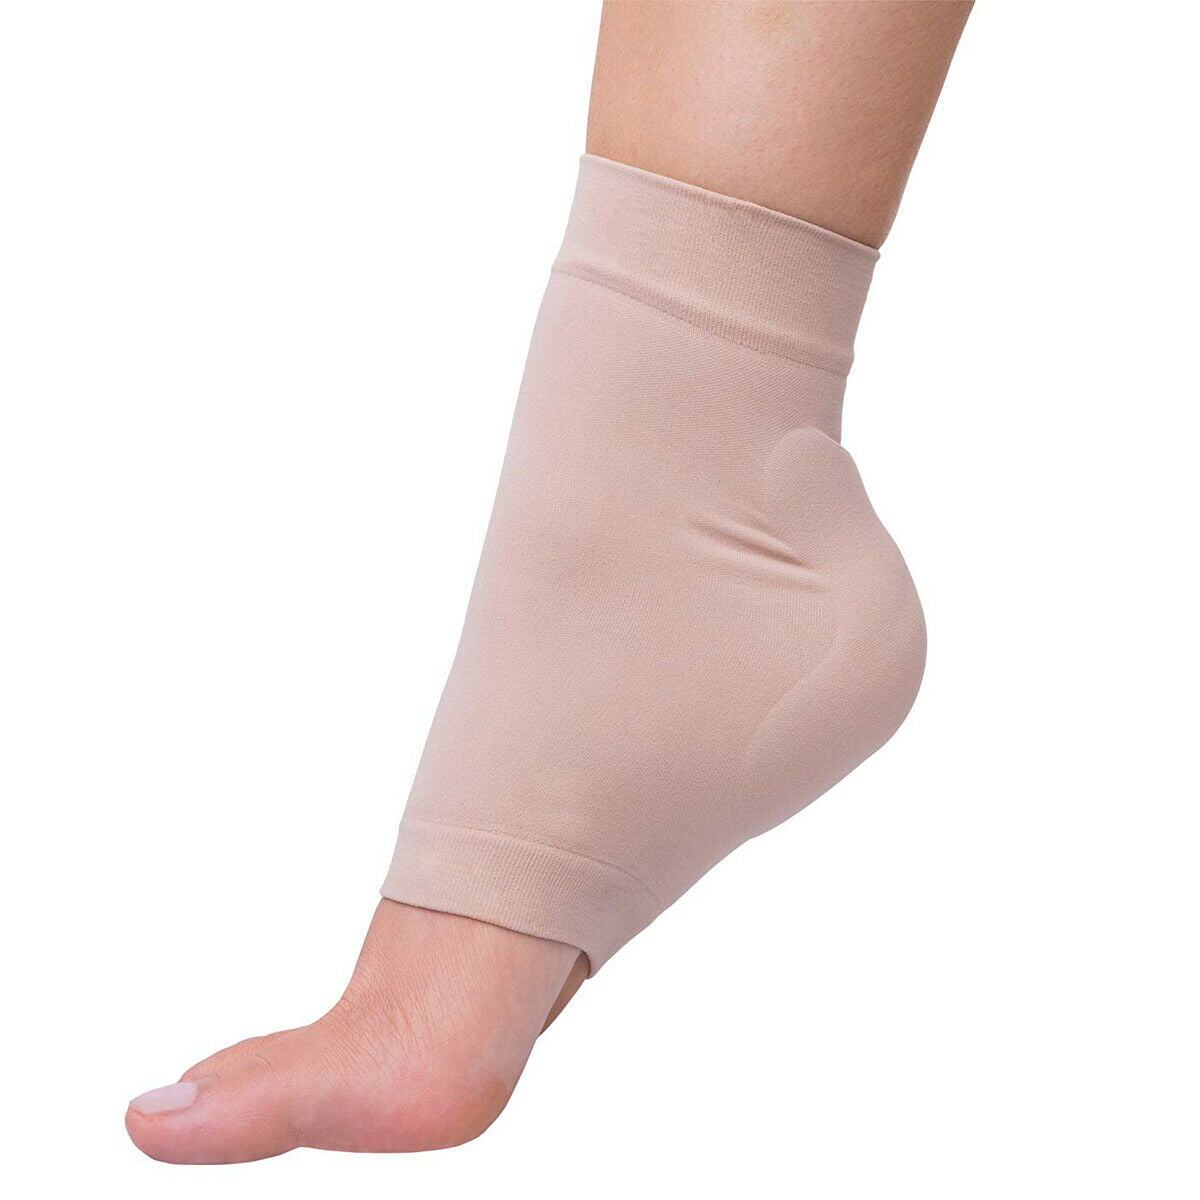 Roht Achilles Tendon and Heel Padded Gel Compression Sock 1 Pair